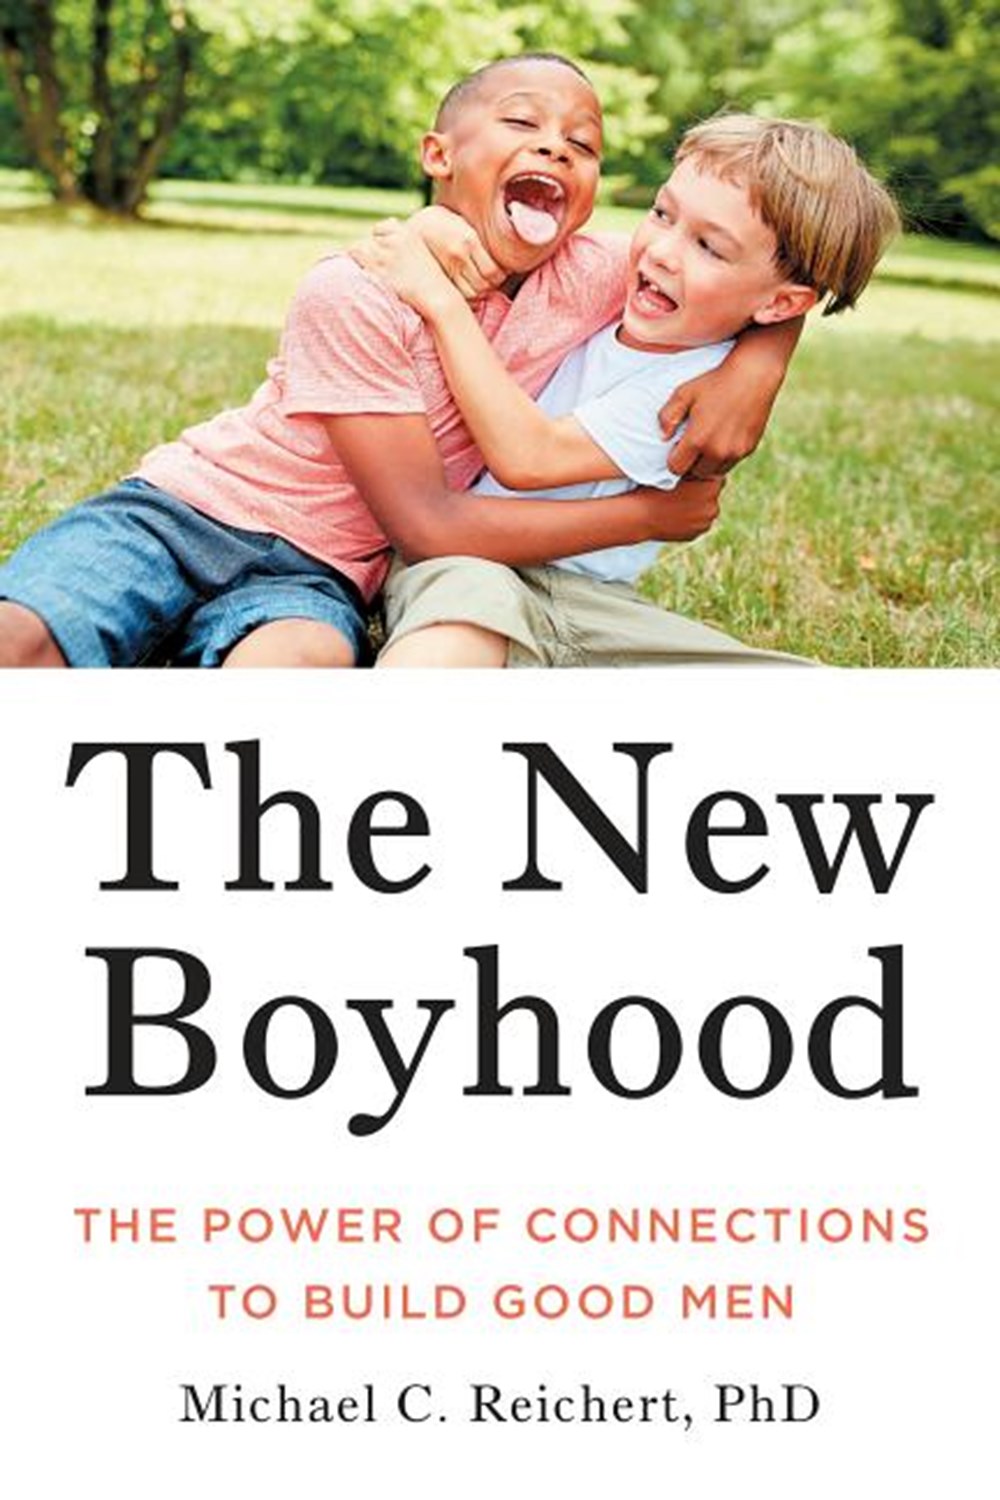 How to Raise a Boy: The Power of Connection to Build Good Men